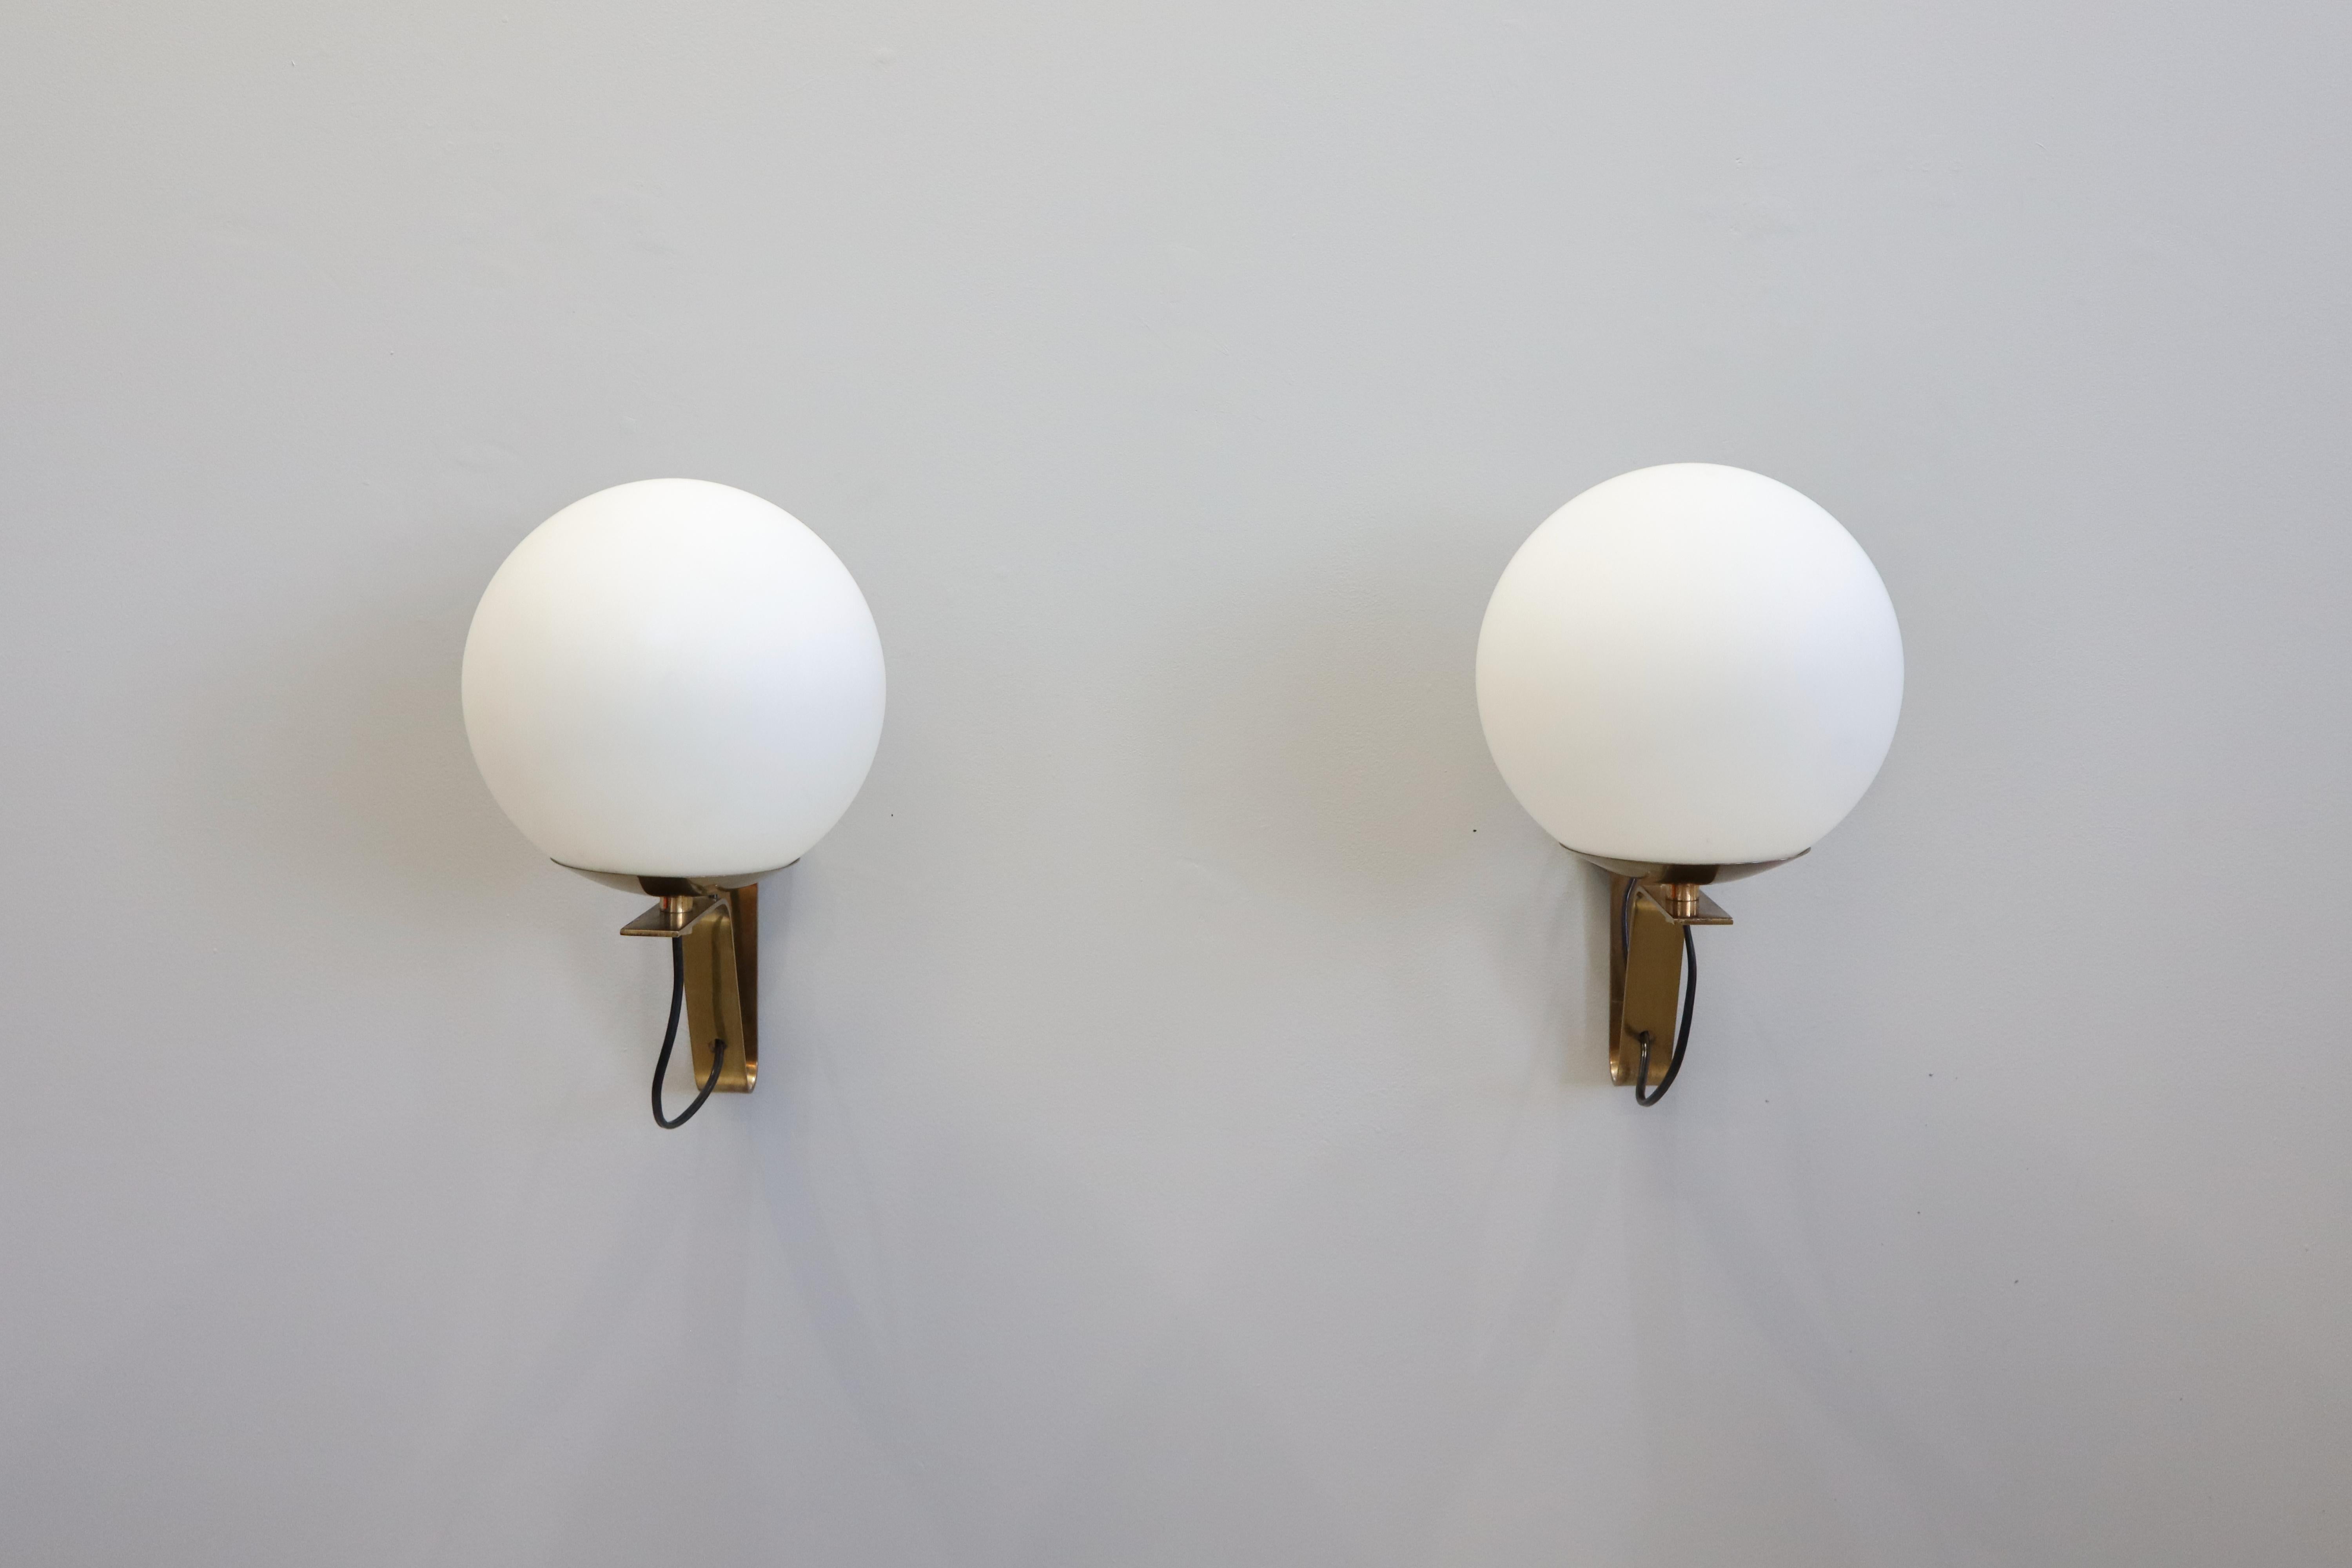 Model b464 sconces by Sergio Asti for Candle. 
Designed and manufactured in Italy circa 1960. 
The sconces are mounted on a polished brass L-shaped bracket that smoothly supports a frosted white globe above the bulb